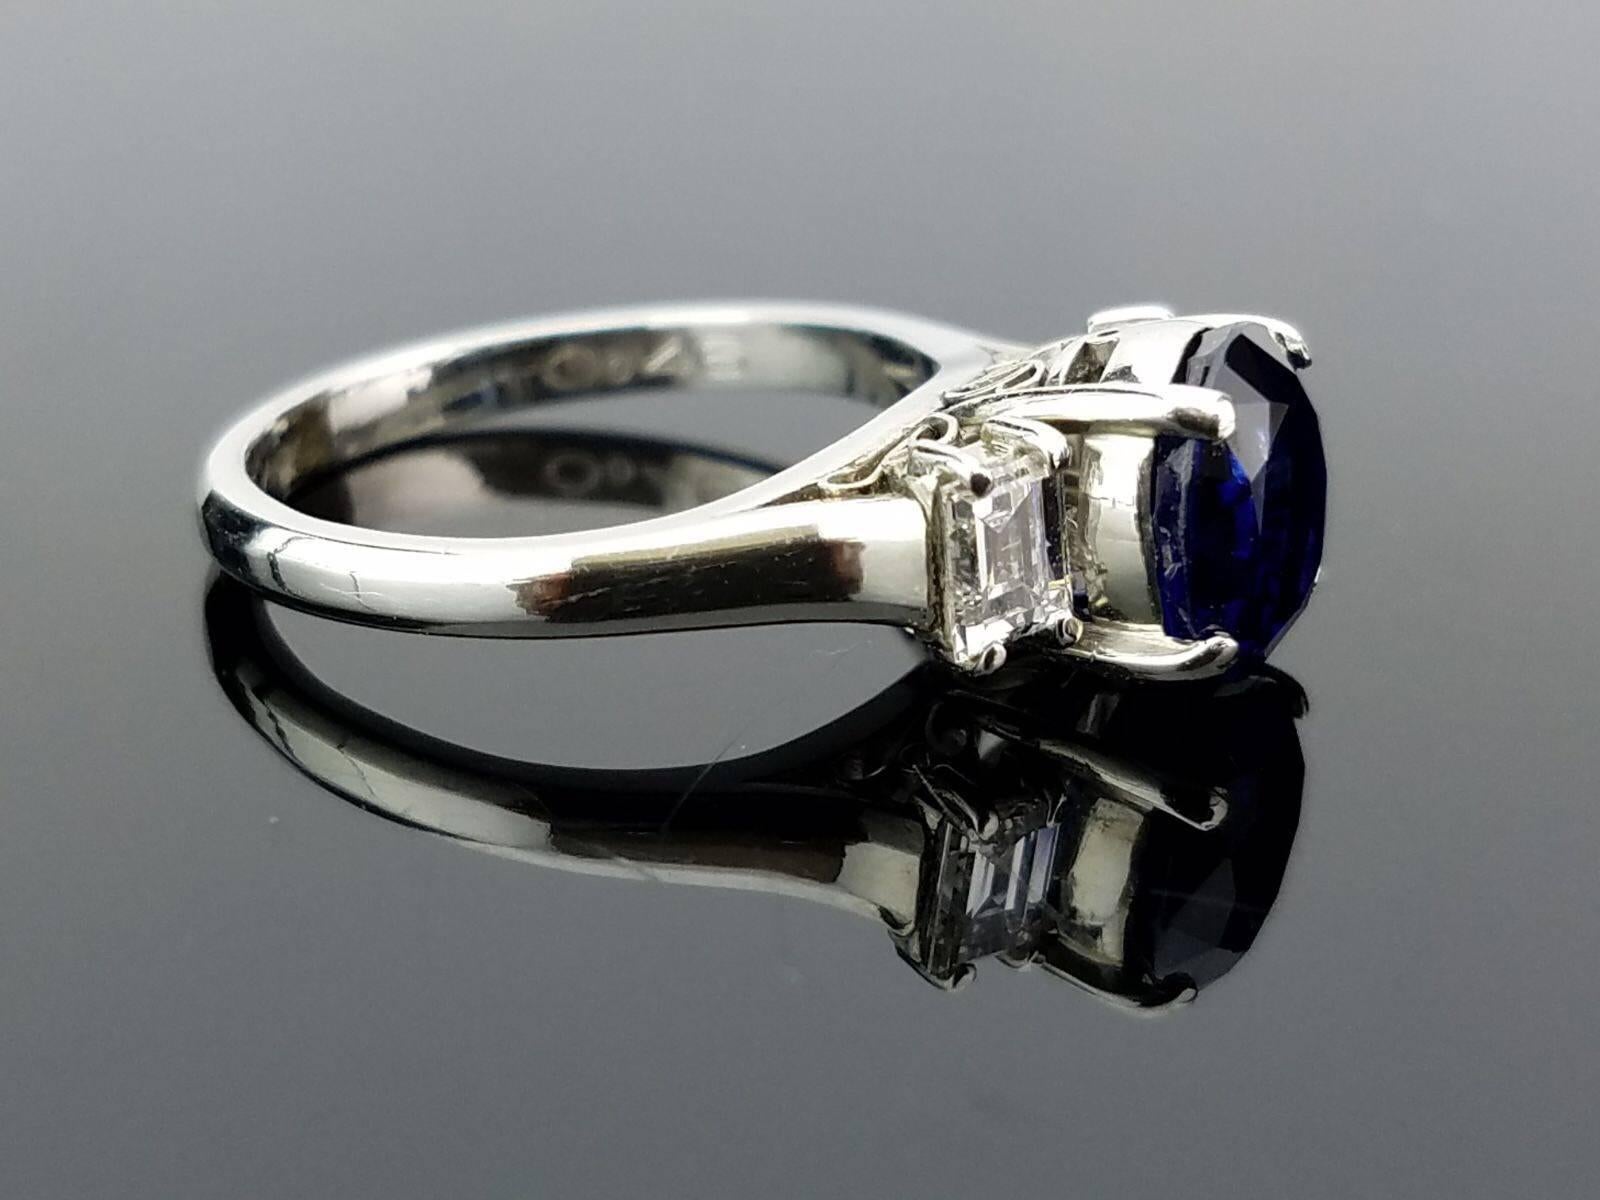 An art-deco looking 2.04 carat Sapphire ring, set with 2 white diamond side stones in Platinum.

Stone Details: 
Stone: Sapphire
Carat Weight: 2.04 Carats

Diamond Details: 
Total Carat Weight: 0.46 carat
Quality: VS , H/I

Platinum: 3.97